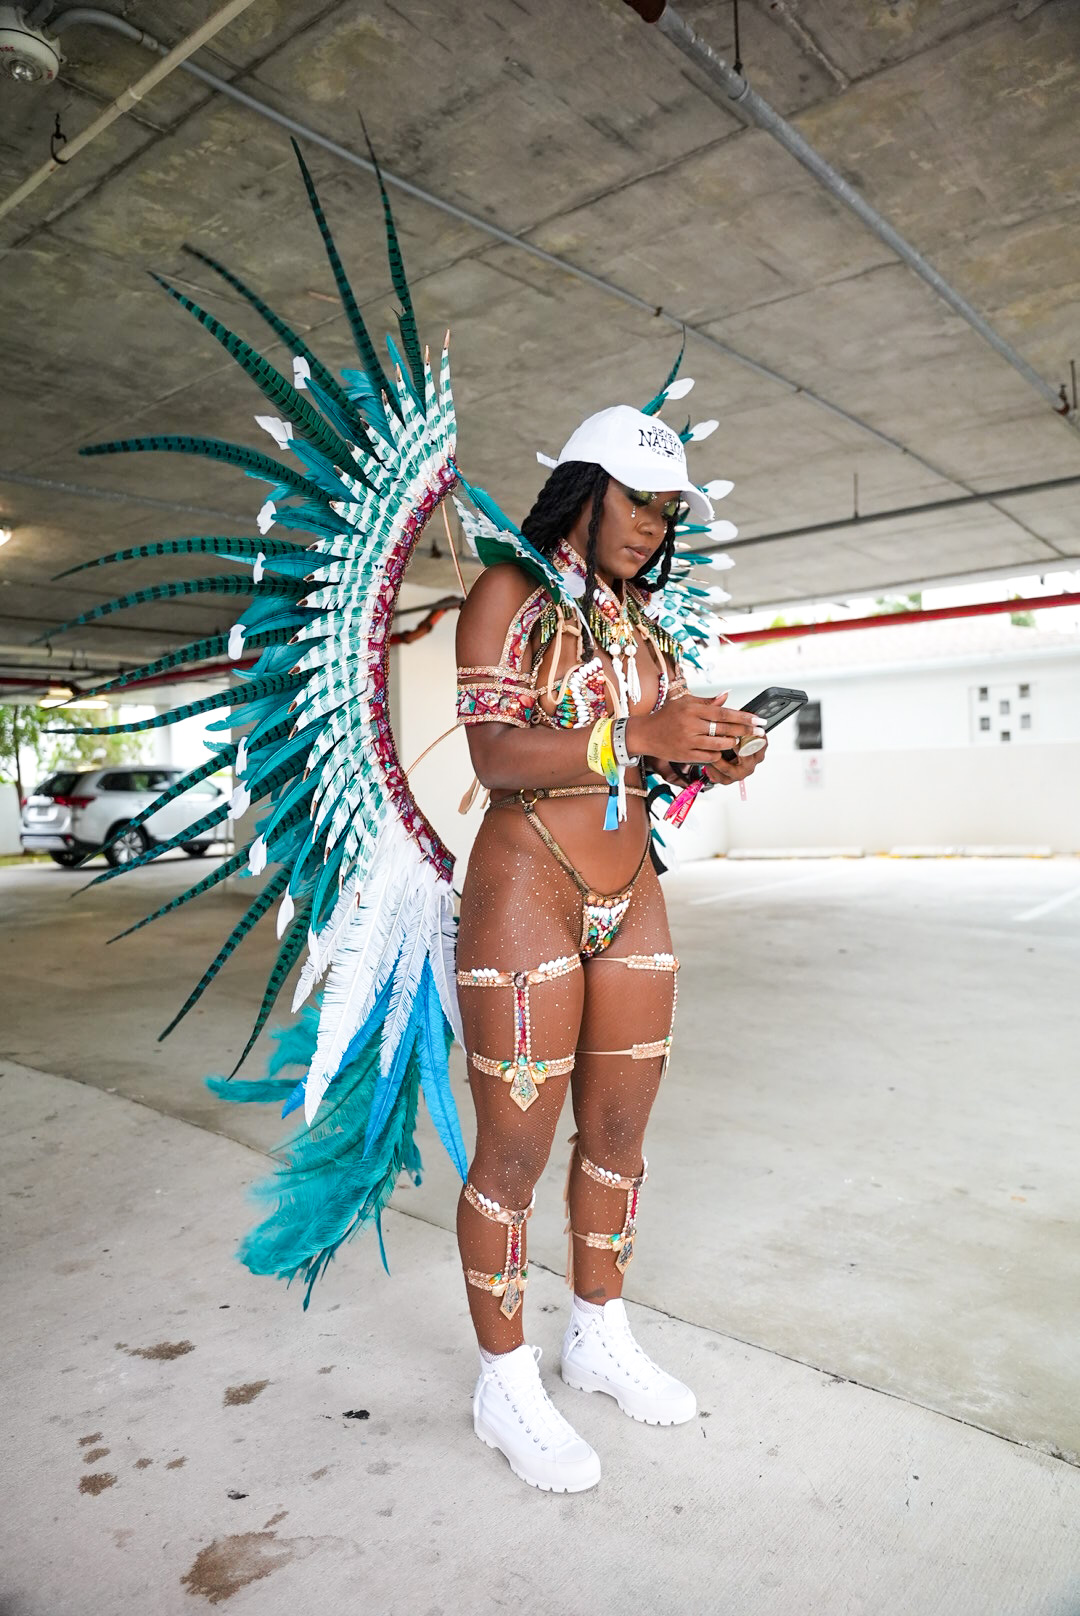 Carnival costume and swimwear supplies retail store based in Trinidad.